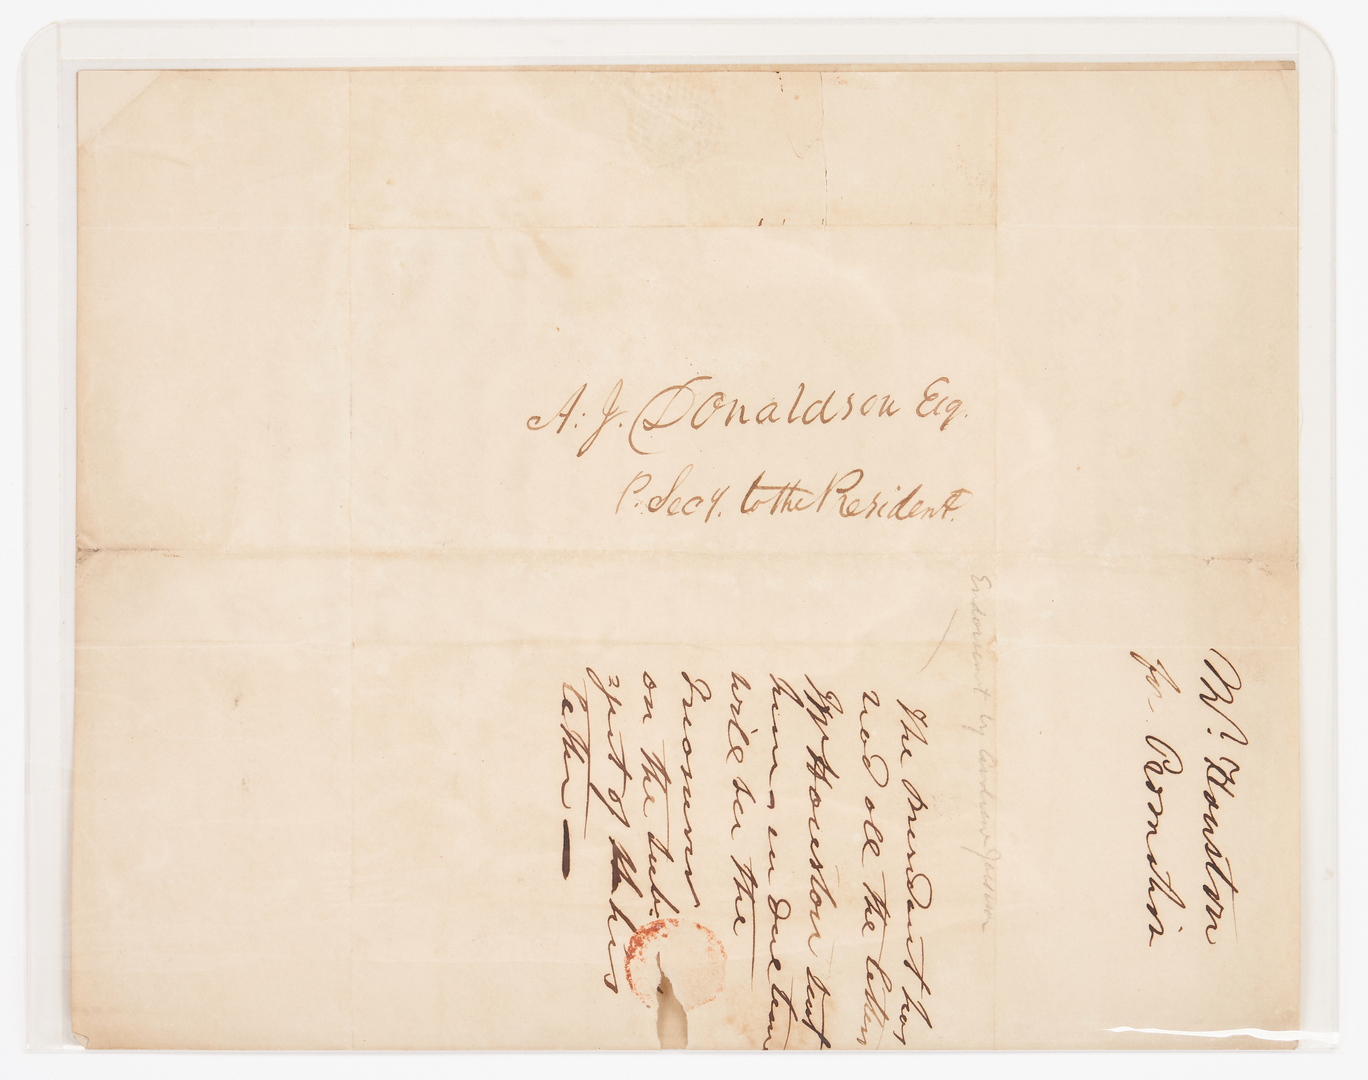 Lot 601: 3 Andrew Jackson related letters plus printed material, 7 items total